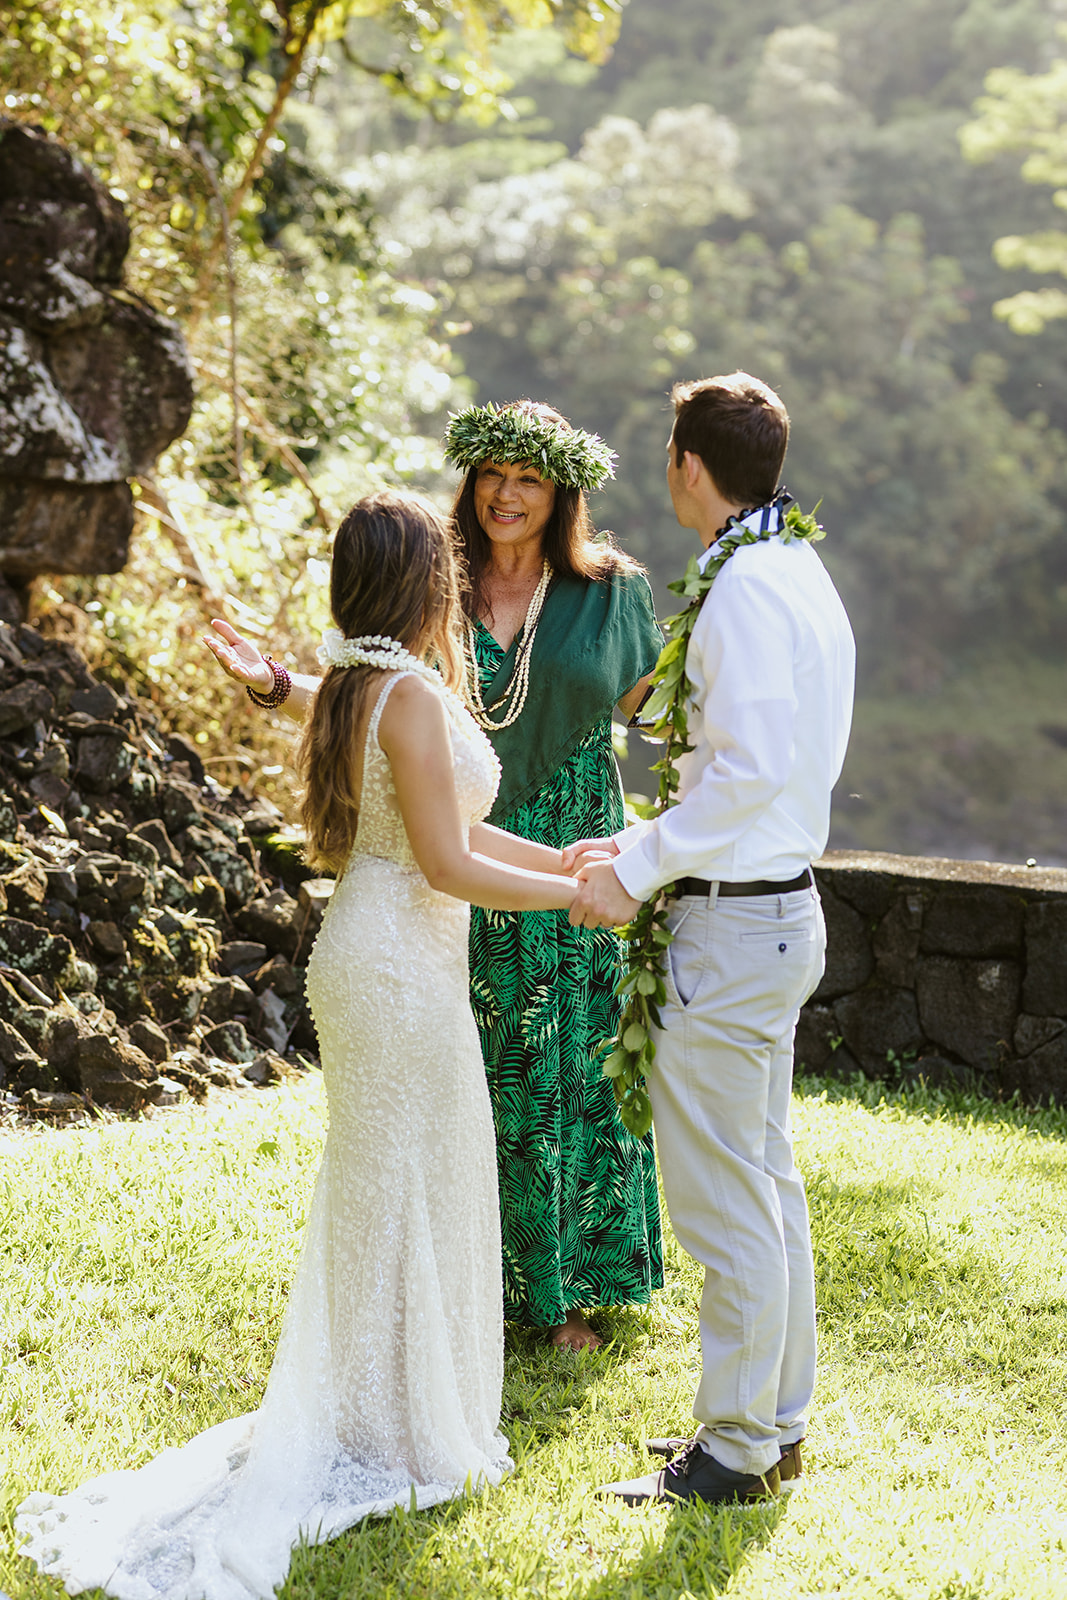 Romantic waterfall ceremony at The Falls, capturing love in its purest form